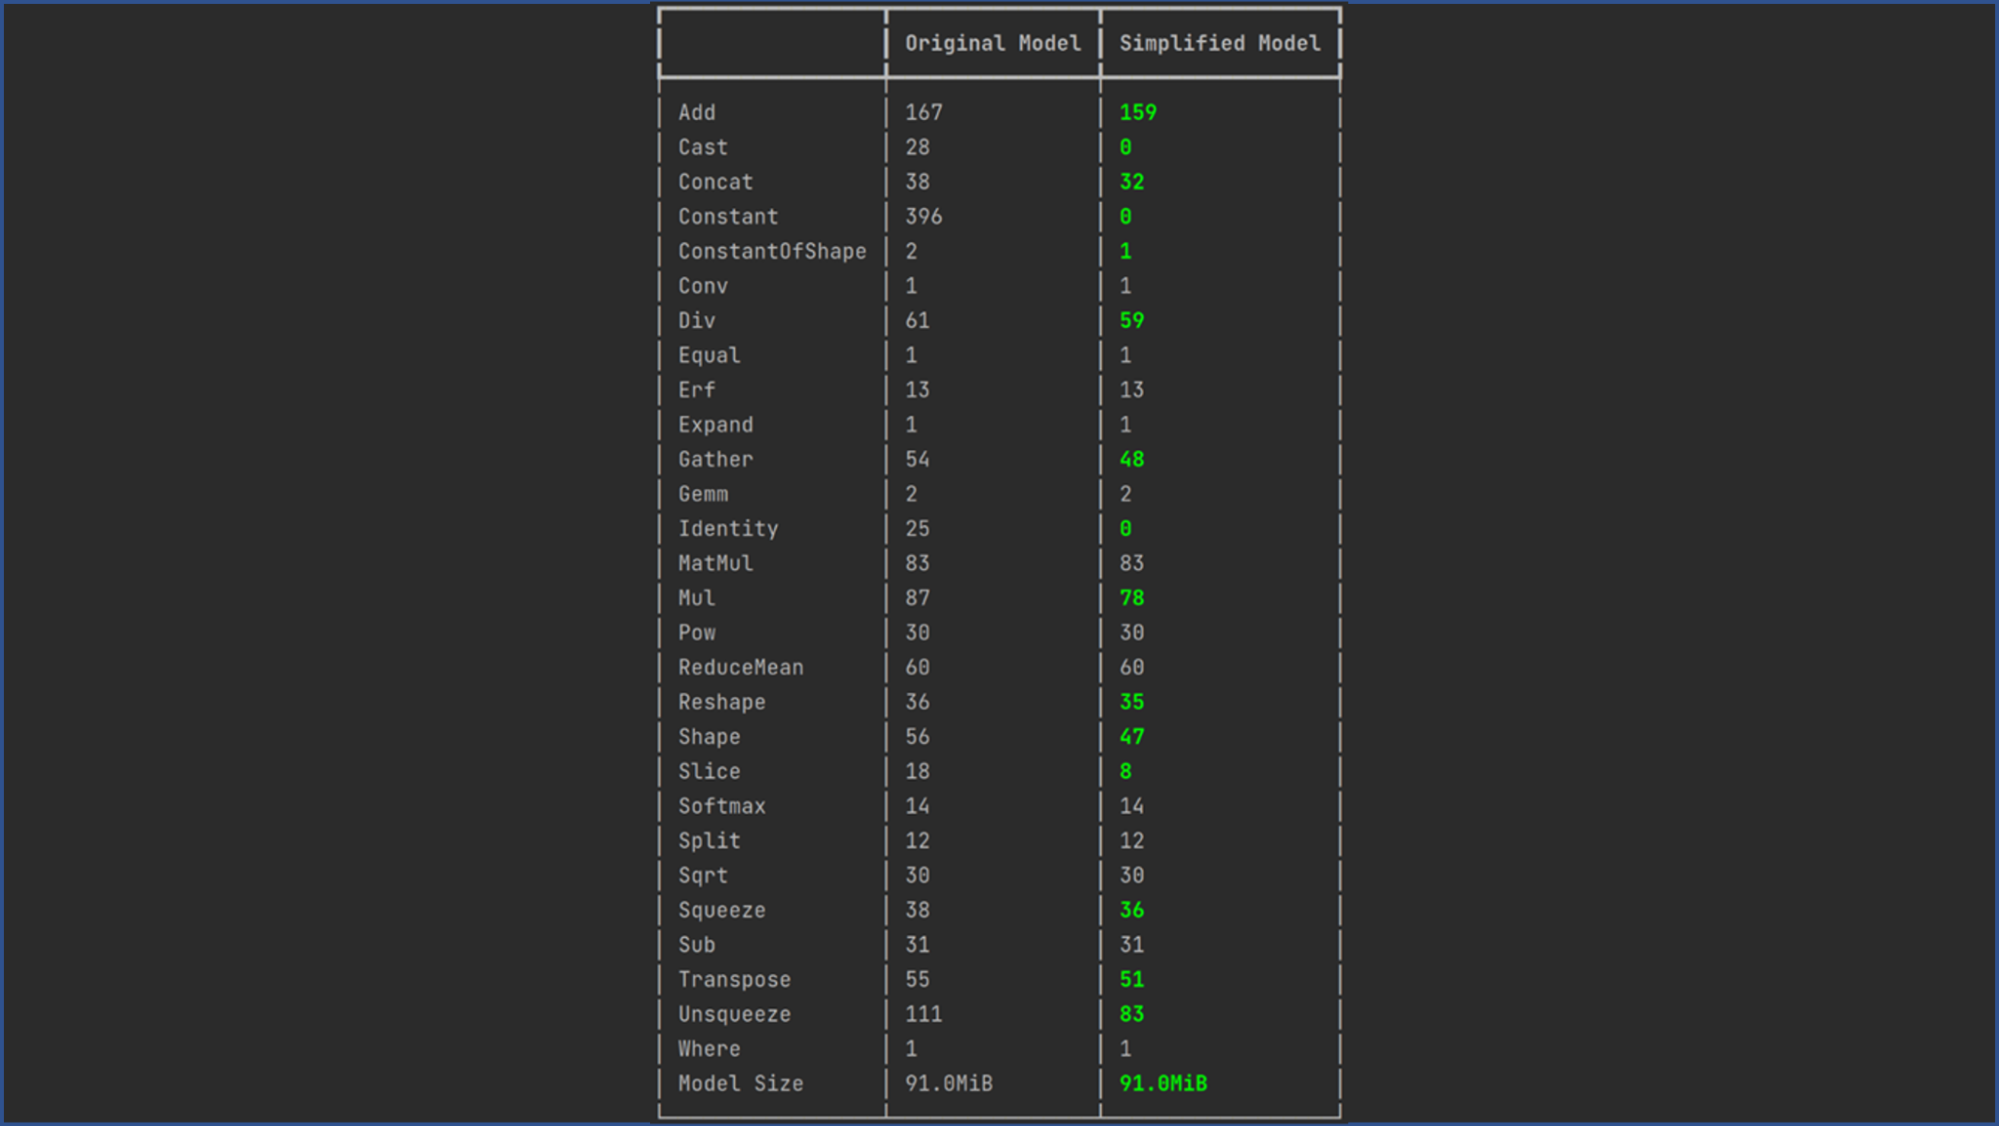 A screenshot of model simplification changed values. Fifteen values were lowered as a result of simplification.